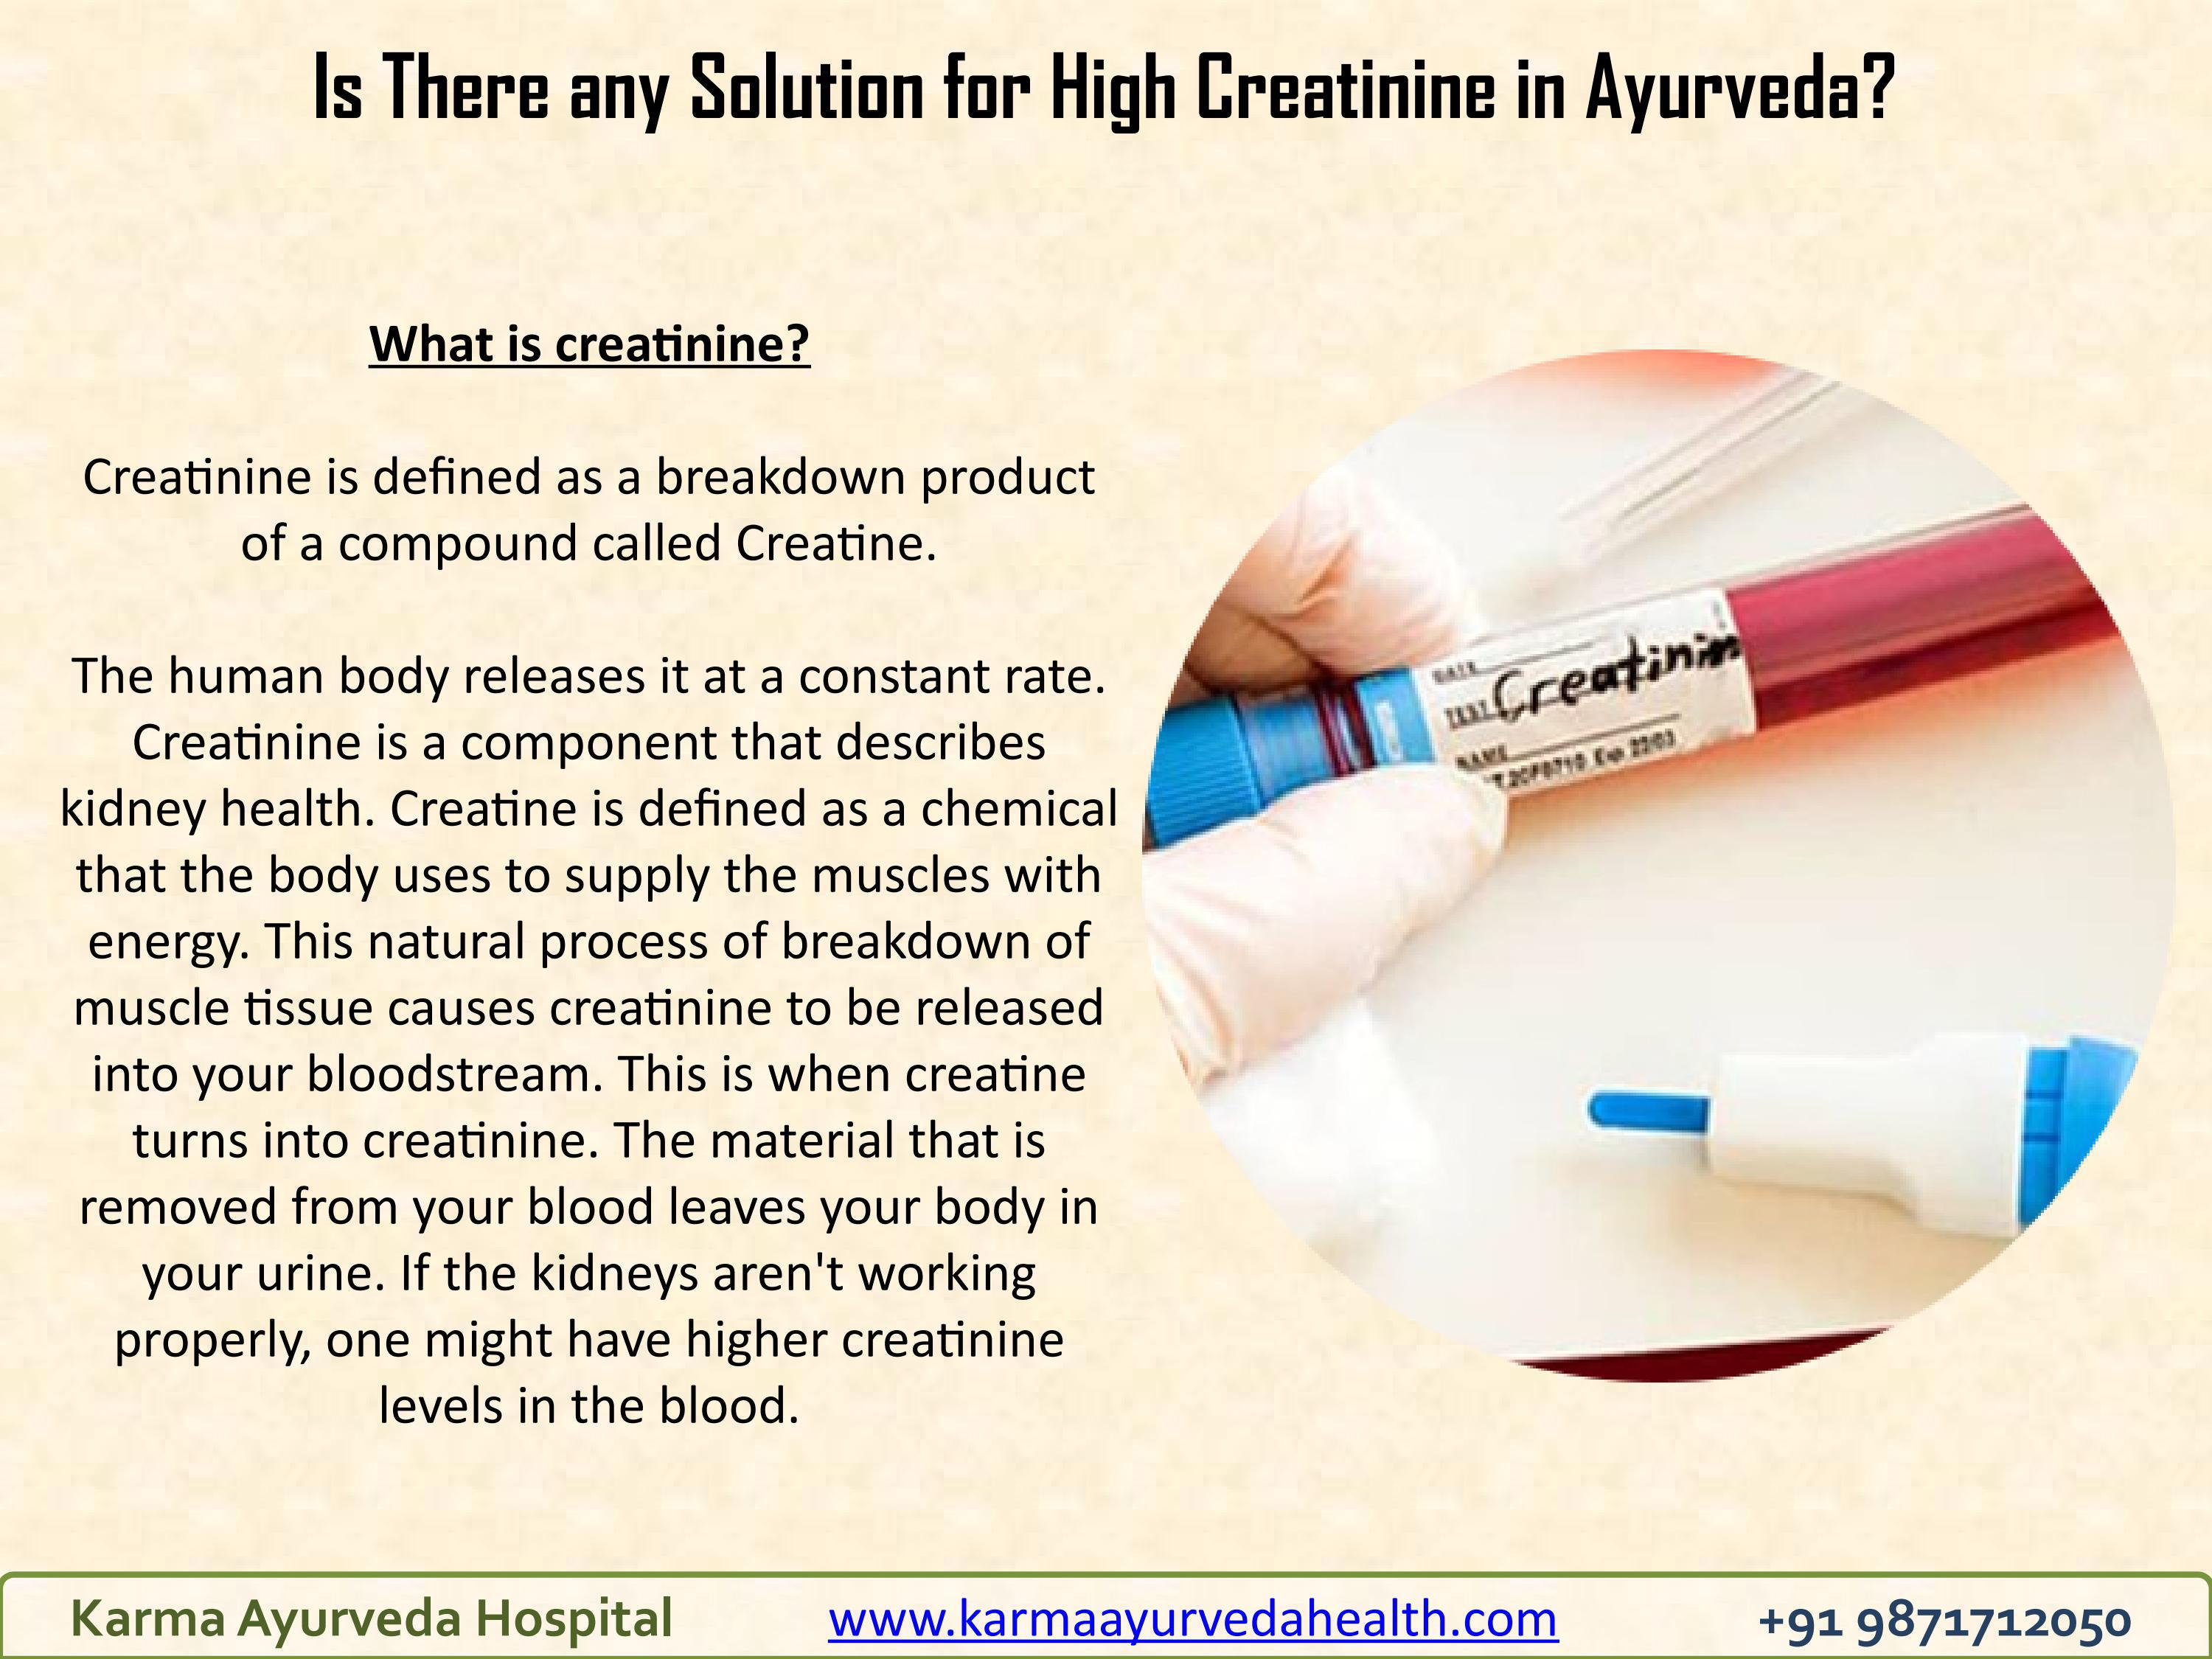 Is There any Solution for High Creatinine in Ayurveda?